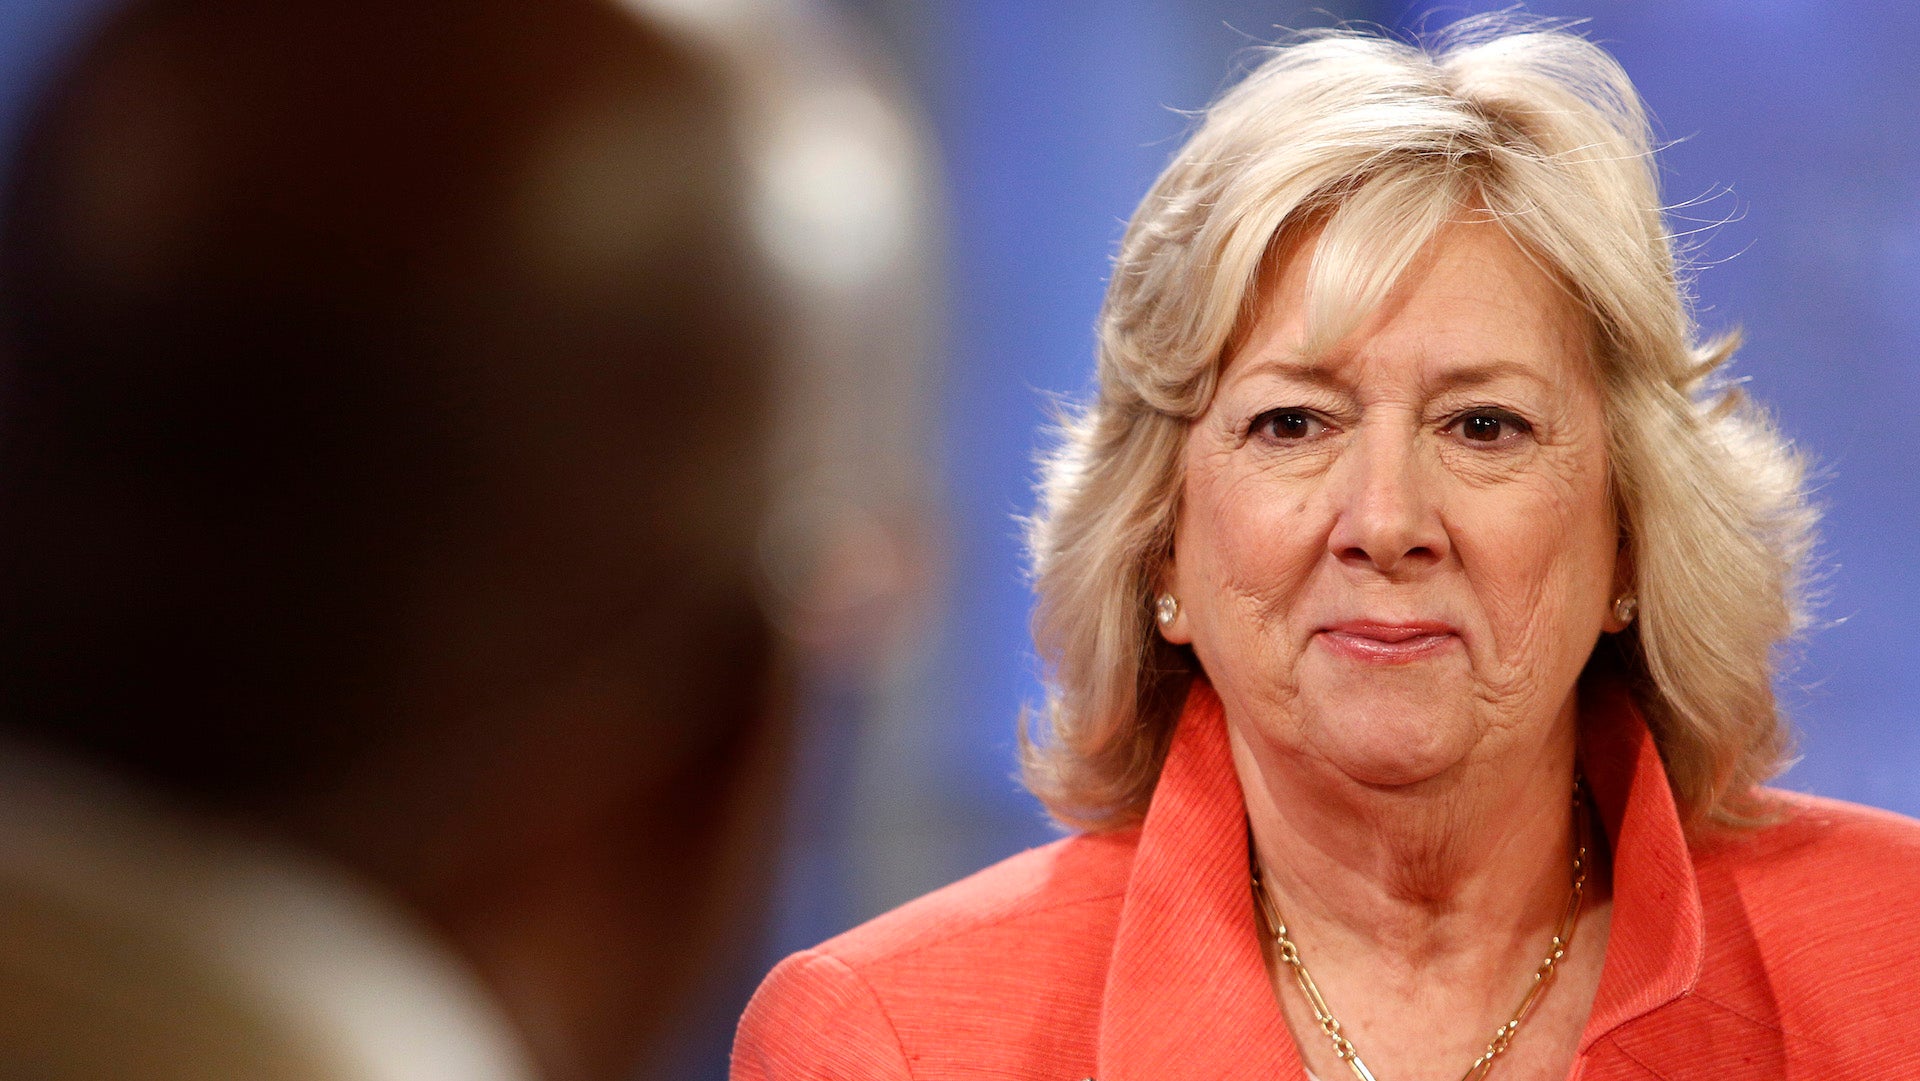 Netflix Calls Linda Fairstein’s Lawsuit Over ‘When They See Us’ Portrayal ‘Frivolous’